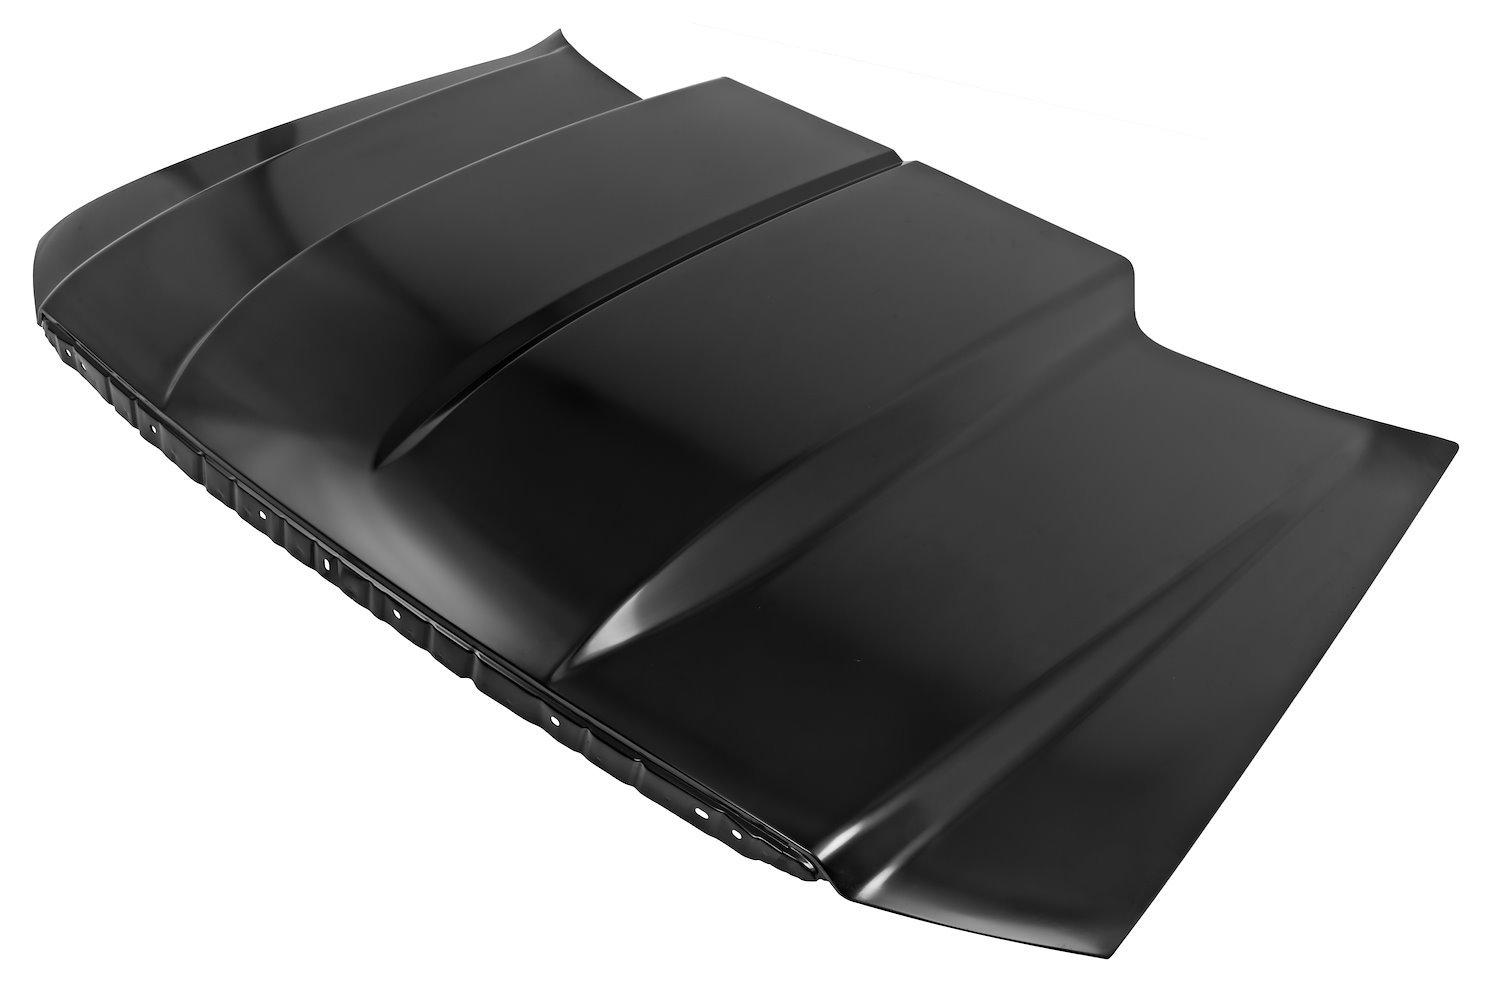 Cowl Induction Hood for 2004-2008 Ford F150 [Single Cowl]